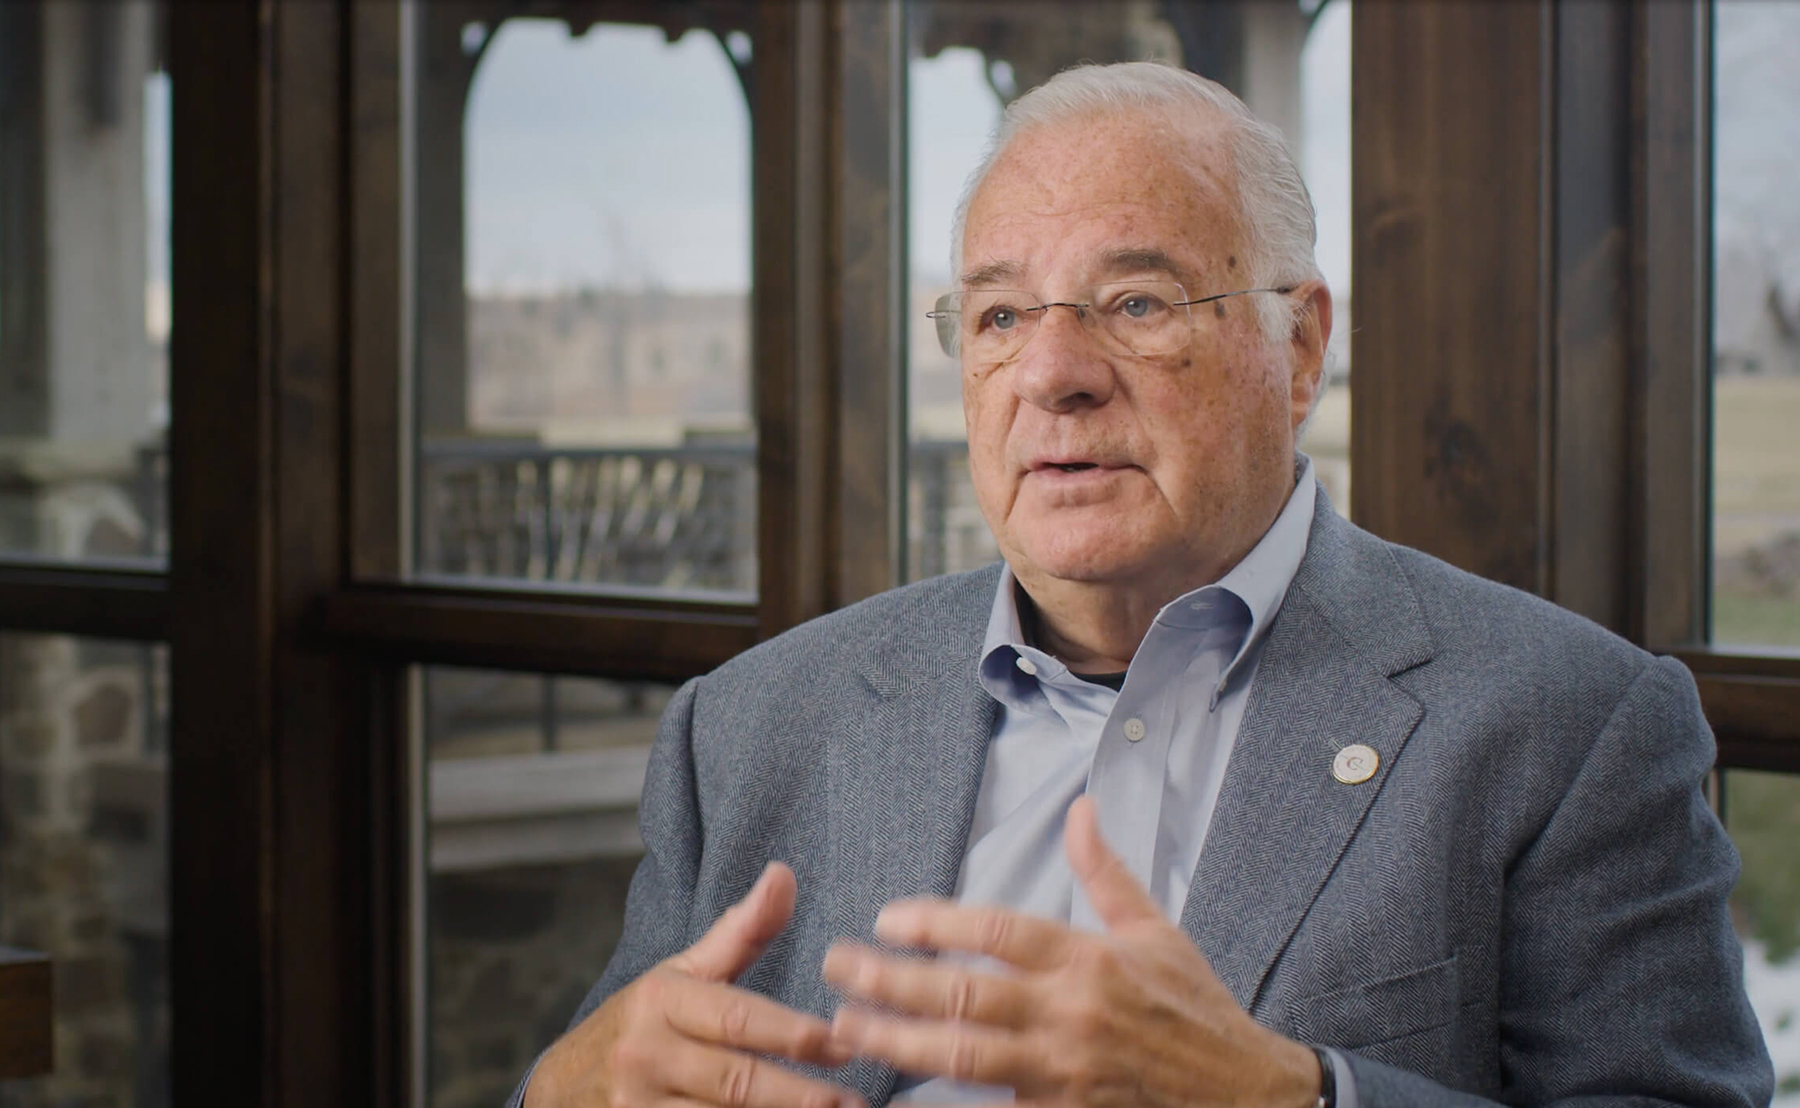 Opportunity Education founder, benefactor, and CEO Joe Ricketts discusses his vision for solving secondary education’s deepest problems with Quest Forward Learning.